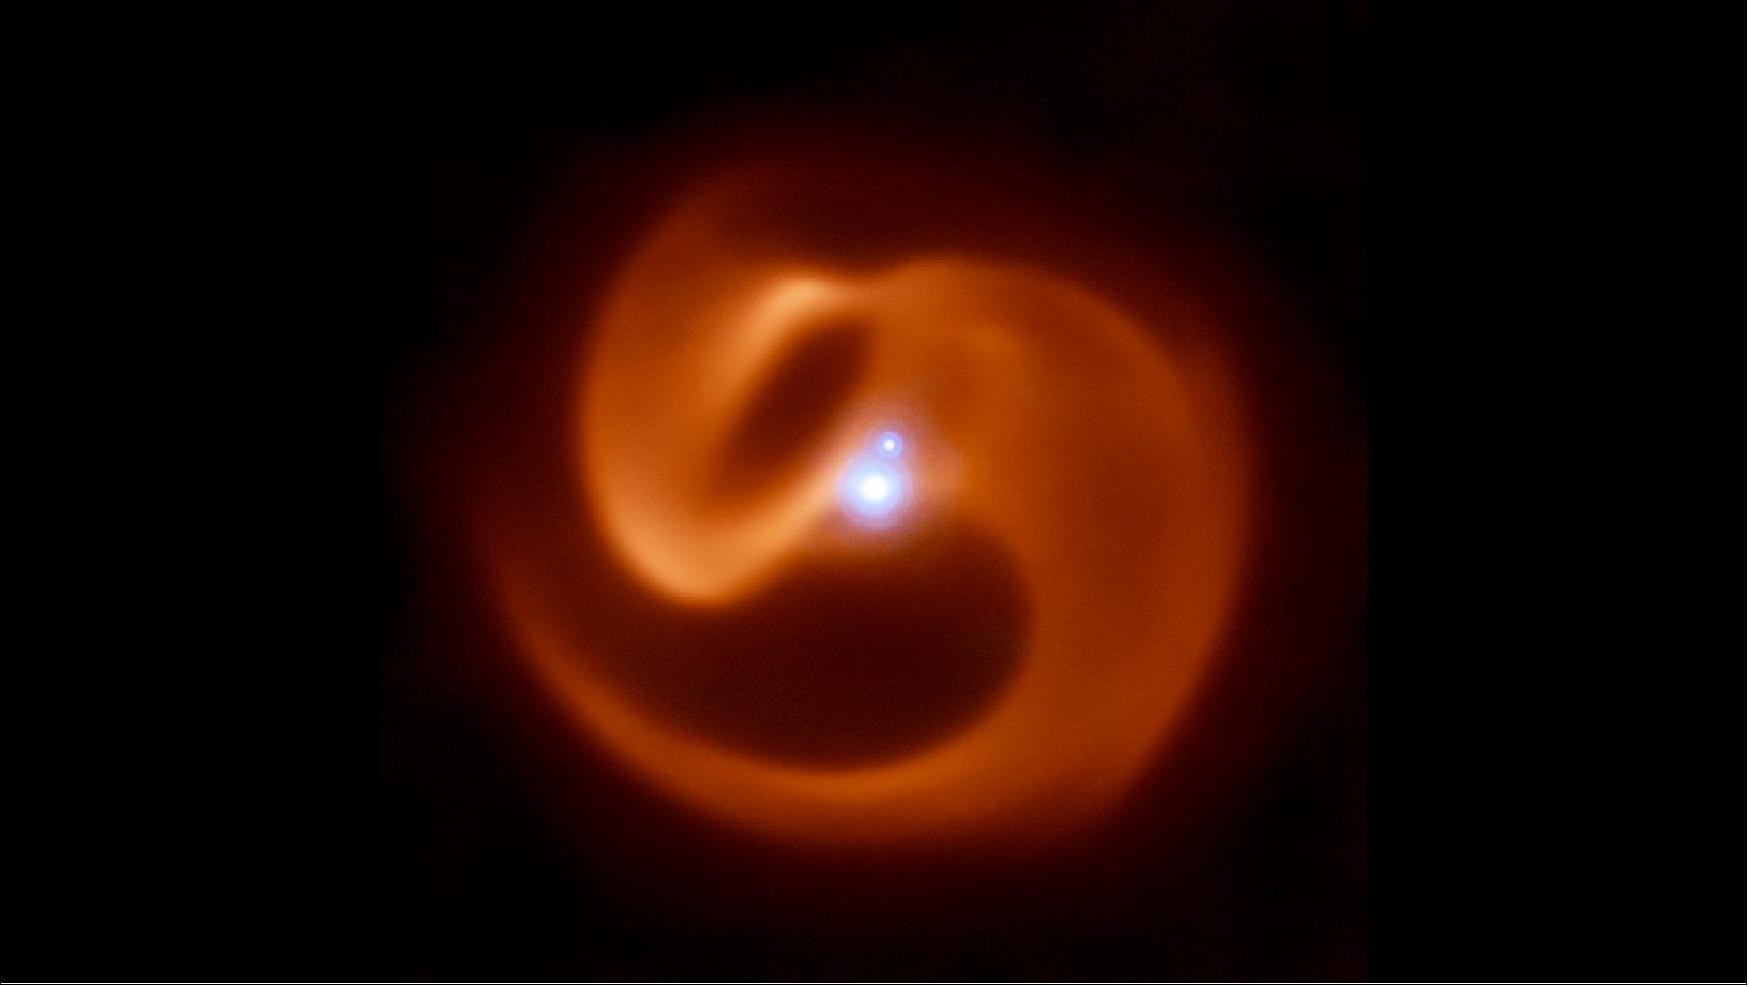 Figure 22: Evidence indicates that large amounts of cosmic dust are produced as the stellar winds of massive stars collide in Wolf-Rayet binary or multiple-star systems. As the stars orbit each other and dust is produced, a distinctive pinwheel pattern is formed, as shown in this image from the European Southern Observatory. Warm dust like this glows in the mid-infrared wavelengths of light detectable by NASA’s James Webb Space Telescope. Confirming the origin of dust will help account for the mysterious over-abundance of it found in galaxies, which is crucial to the later development of stars, planets, and life as we know it (image credit: ESO)